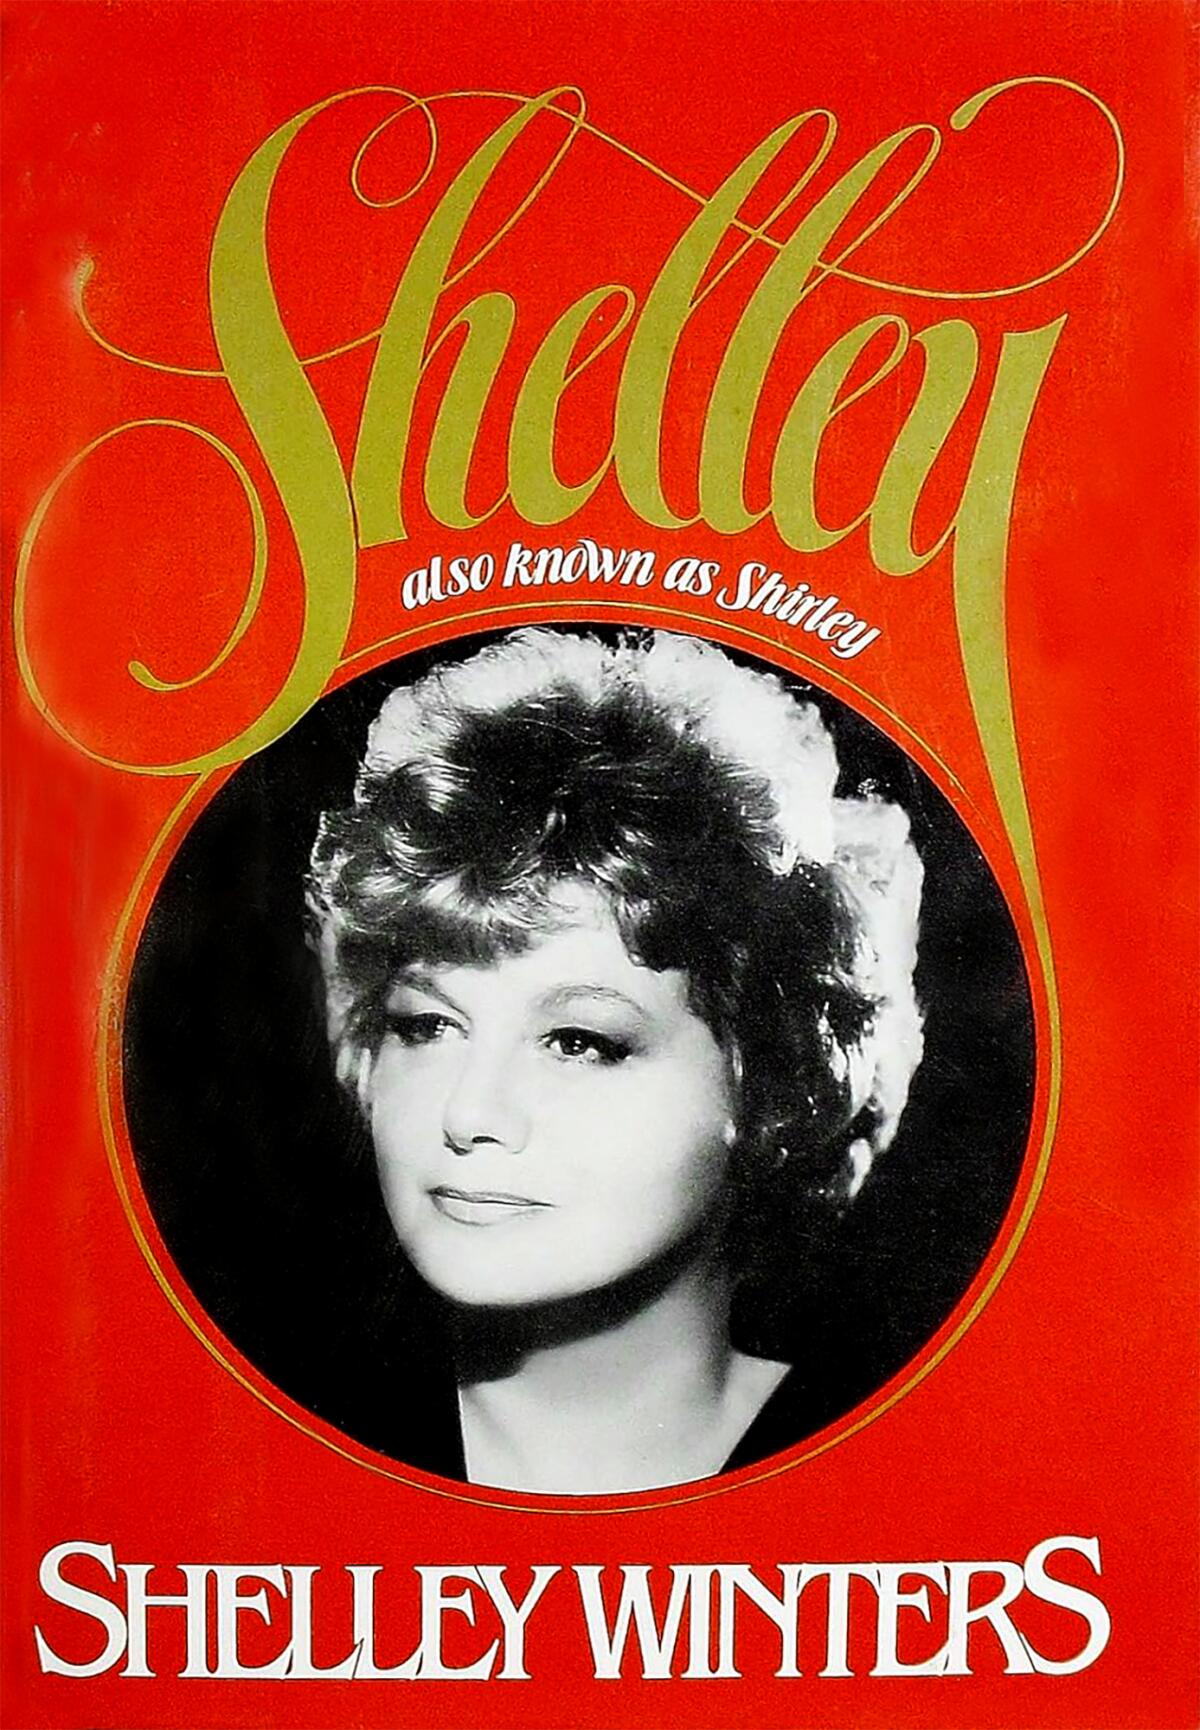 "Shelley: Also known as Shirley" by Shelley Winters, 1980